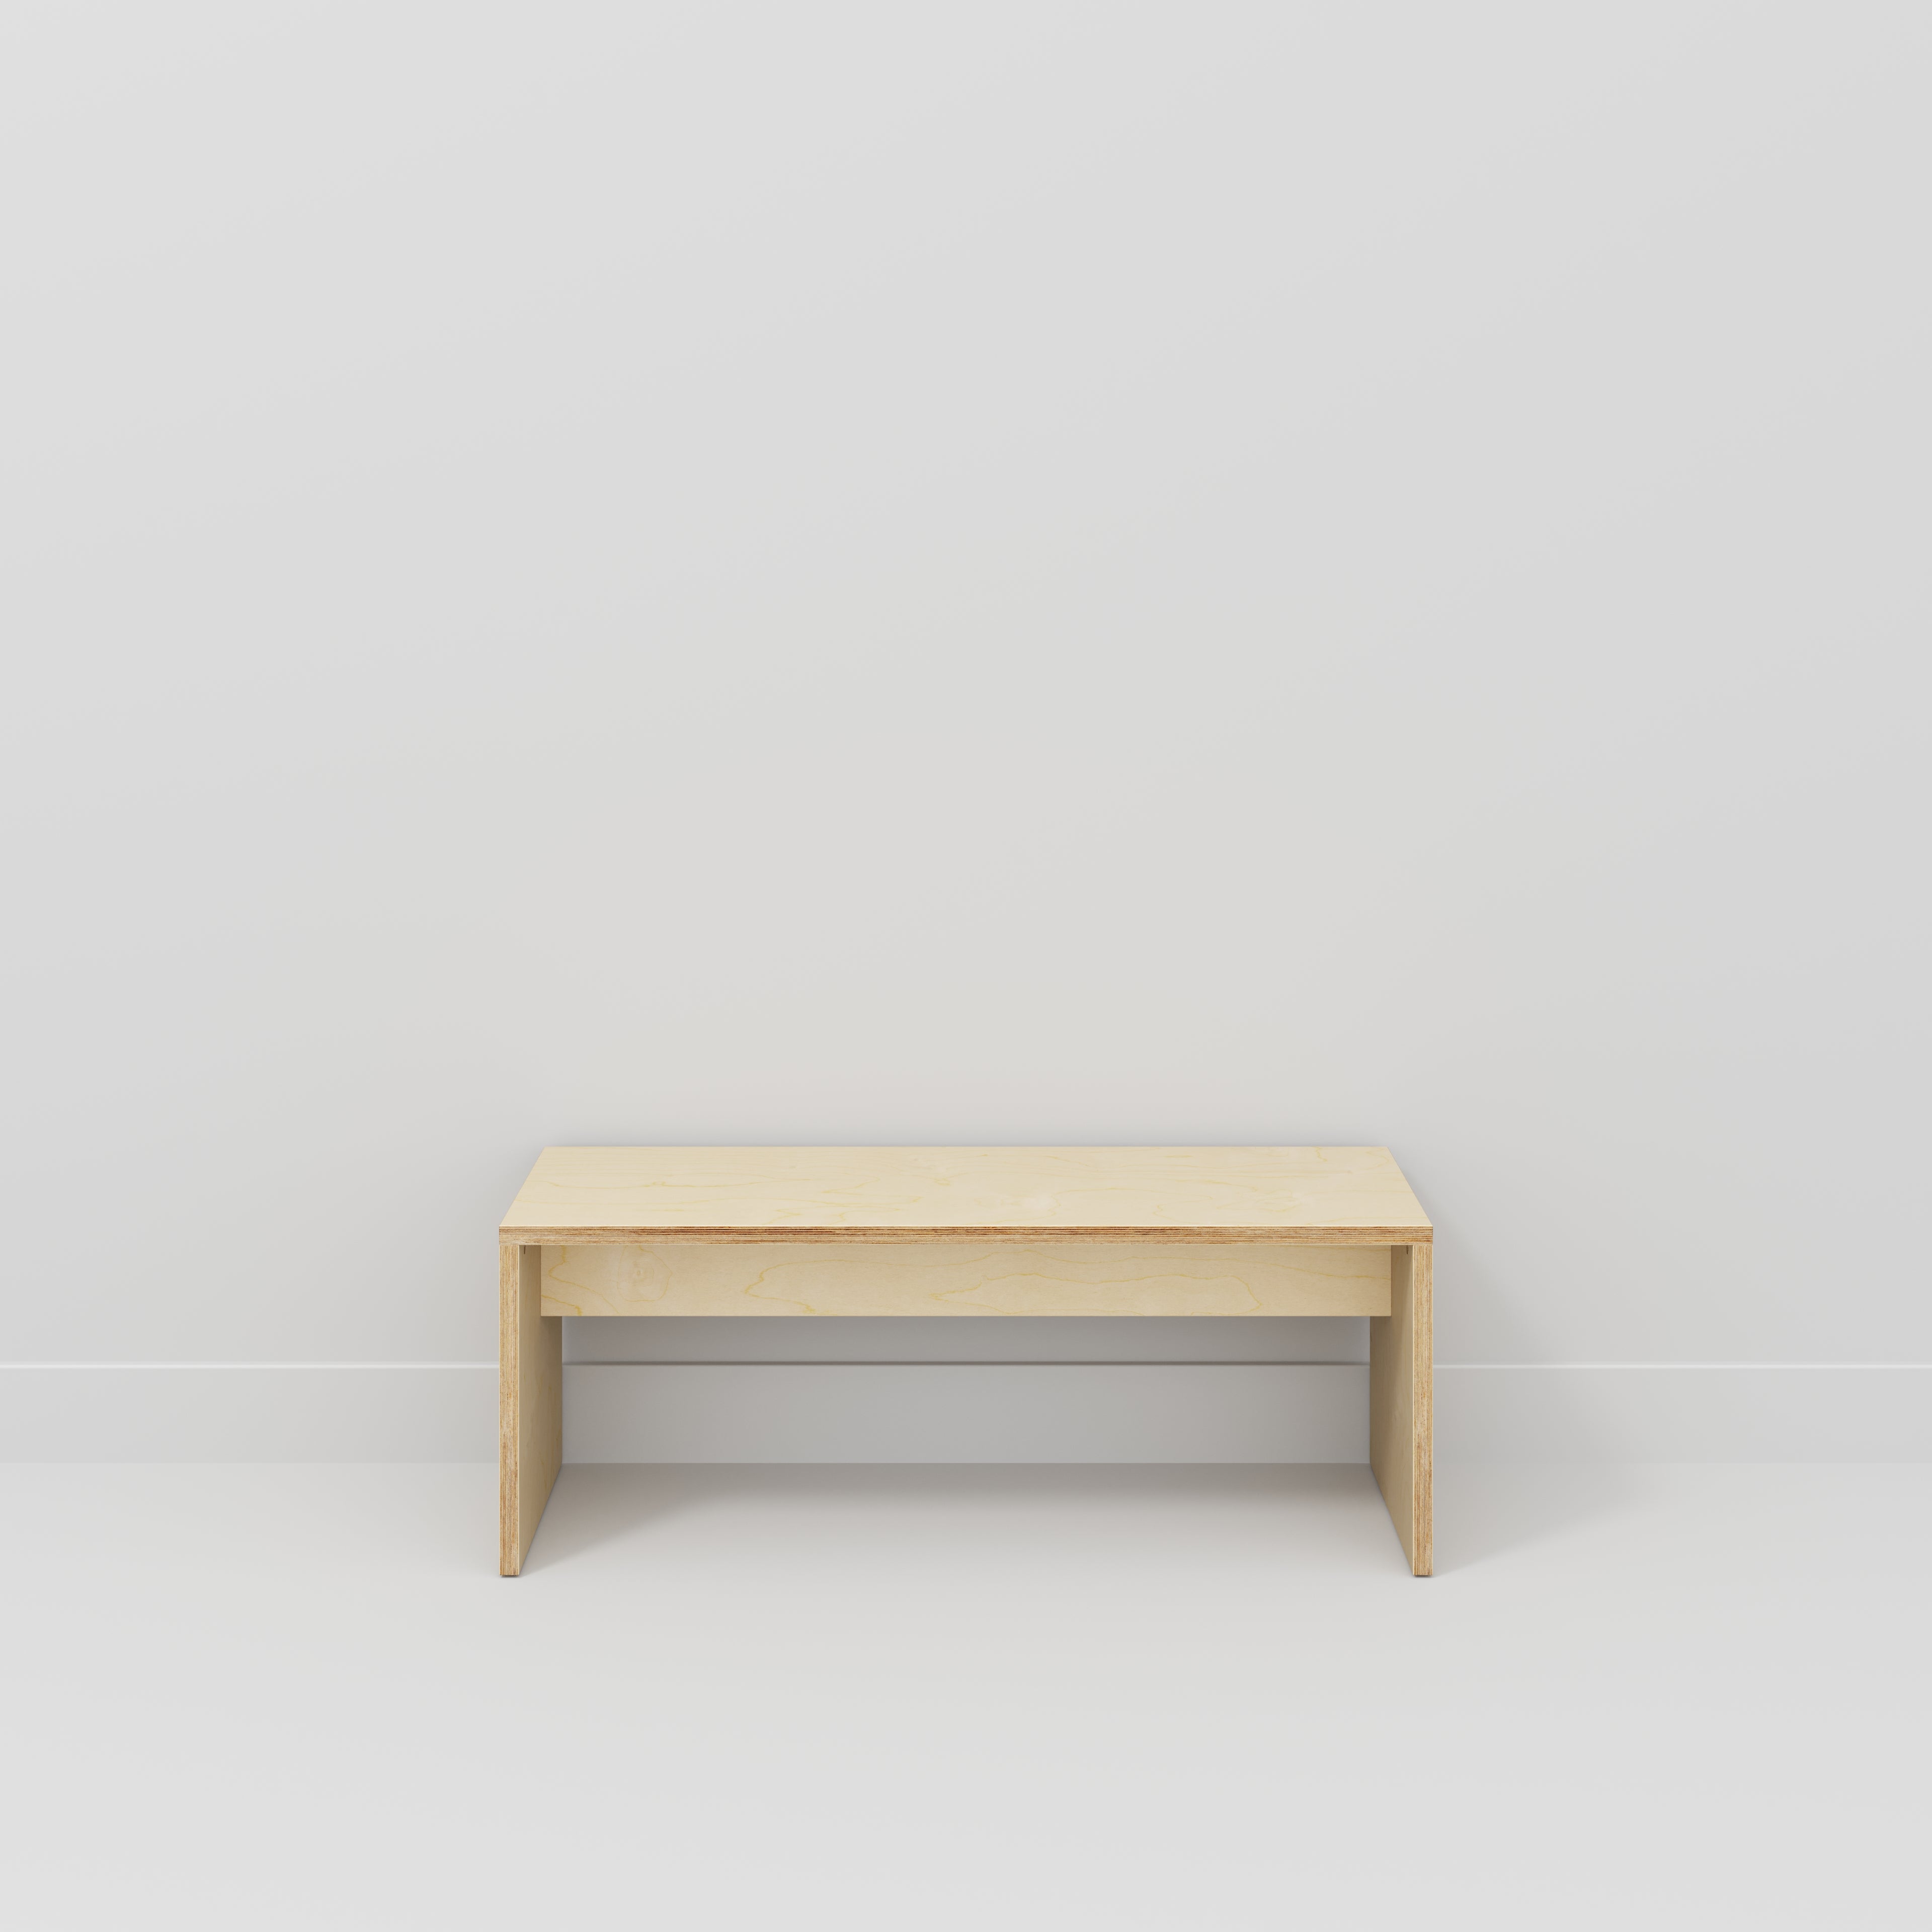 Bench Seat with Solid Sides - Plywood Birch - 1200(w) x 400(d)